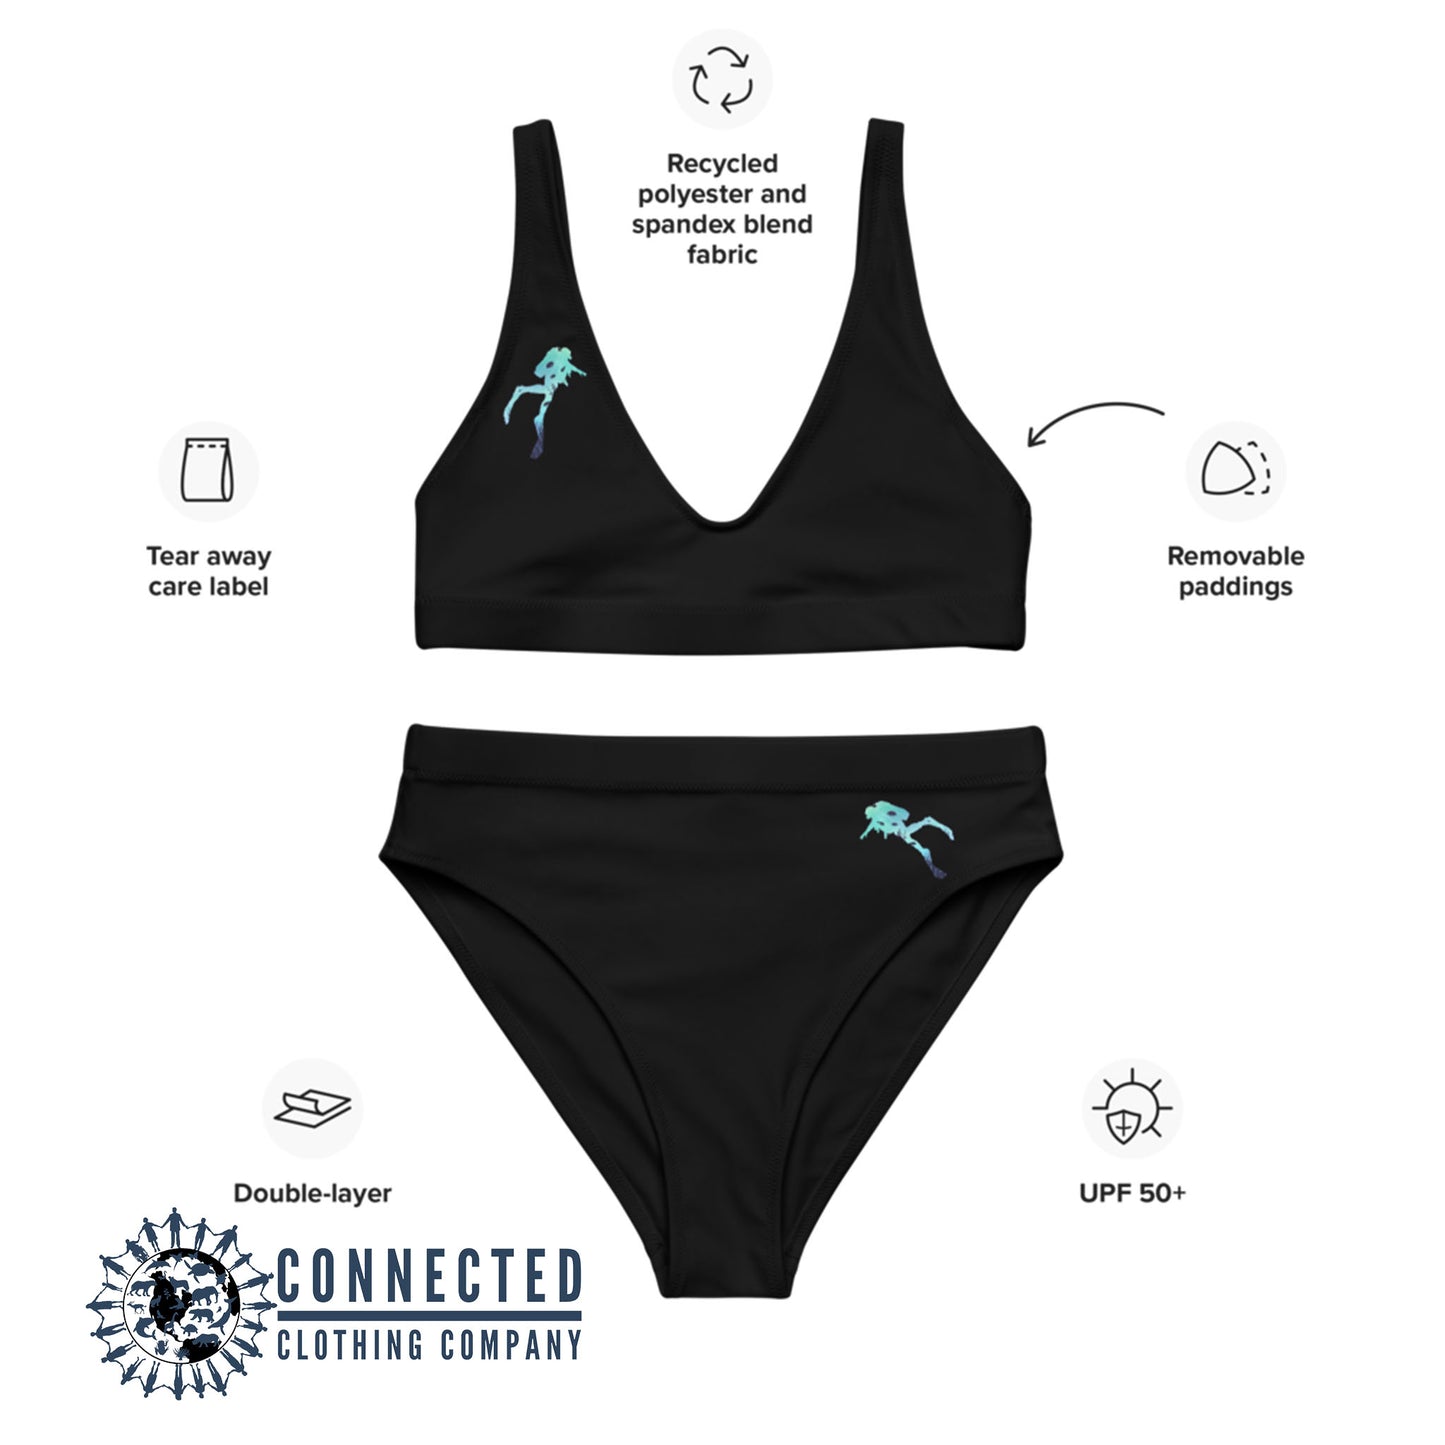 Scuba Diver Recycled Bikini - 2 piece high waisted bottom bikini - sweetsherriloudesigns - Ethically and Sustainably Made Apparel - 10% of profits donated to ocean conservation